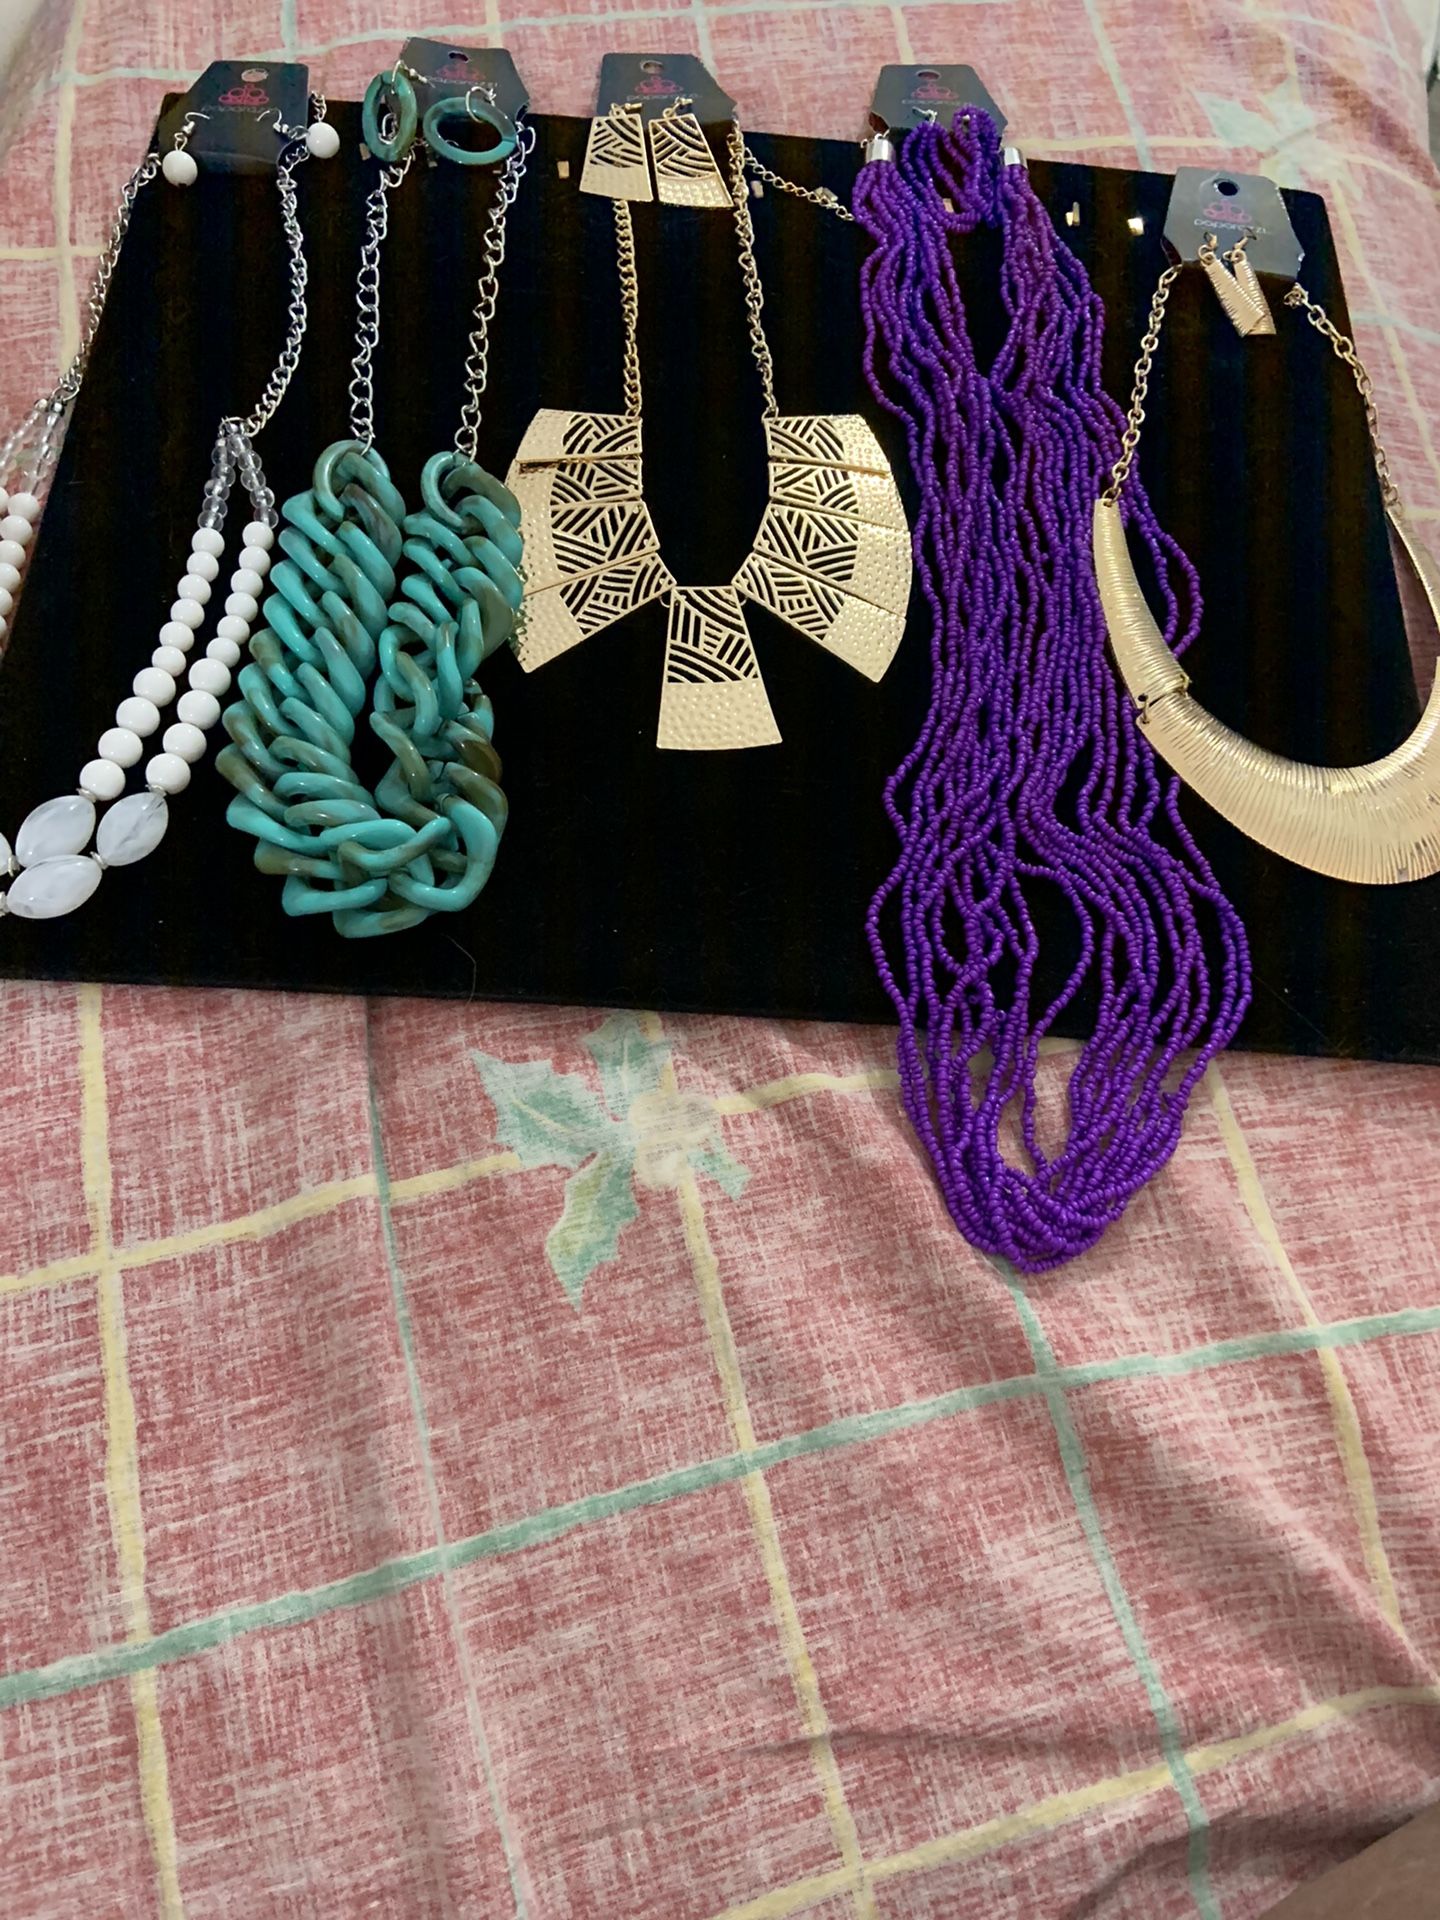 Paparrazzi Jewelry lot 200 pieces. Assortment of necklaces with complimentary earrings and earrings, bracelet and rings.